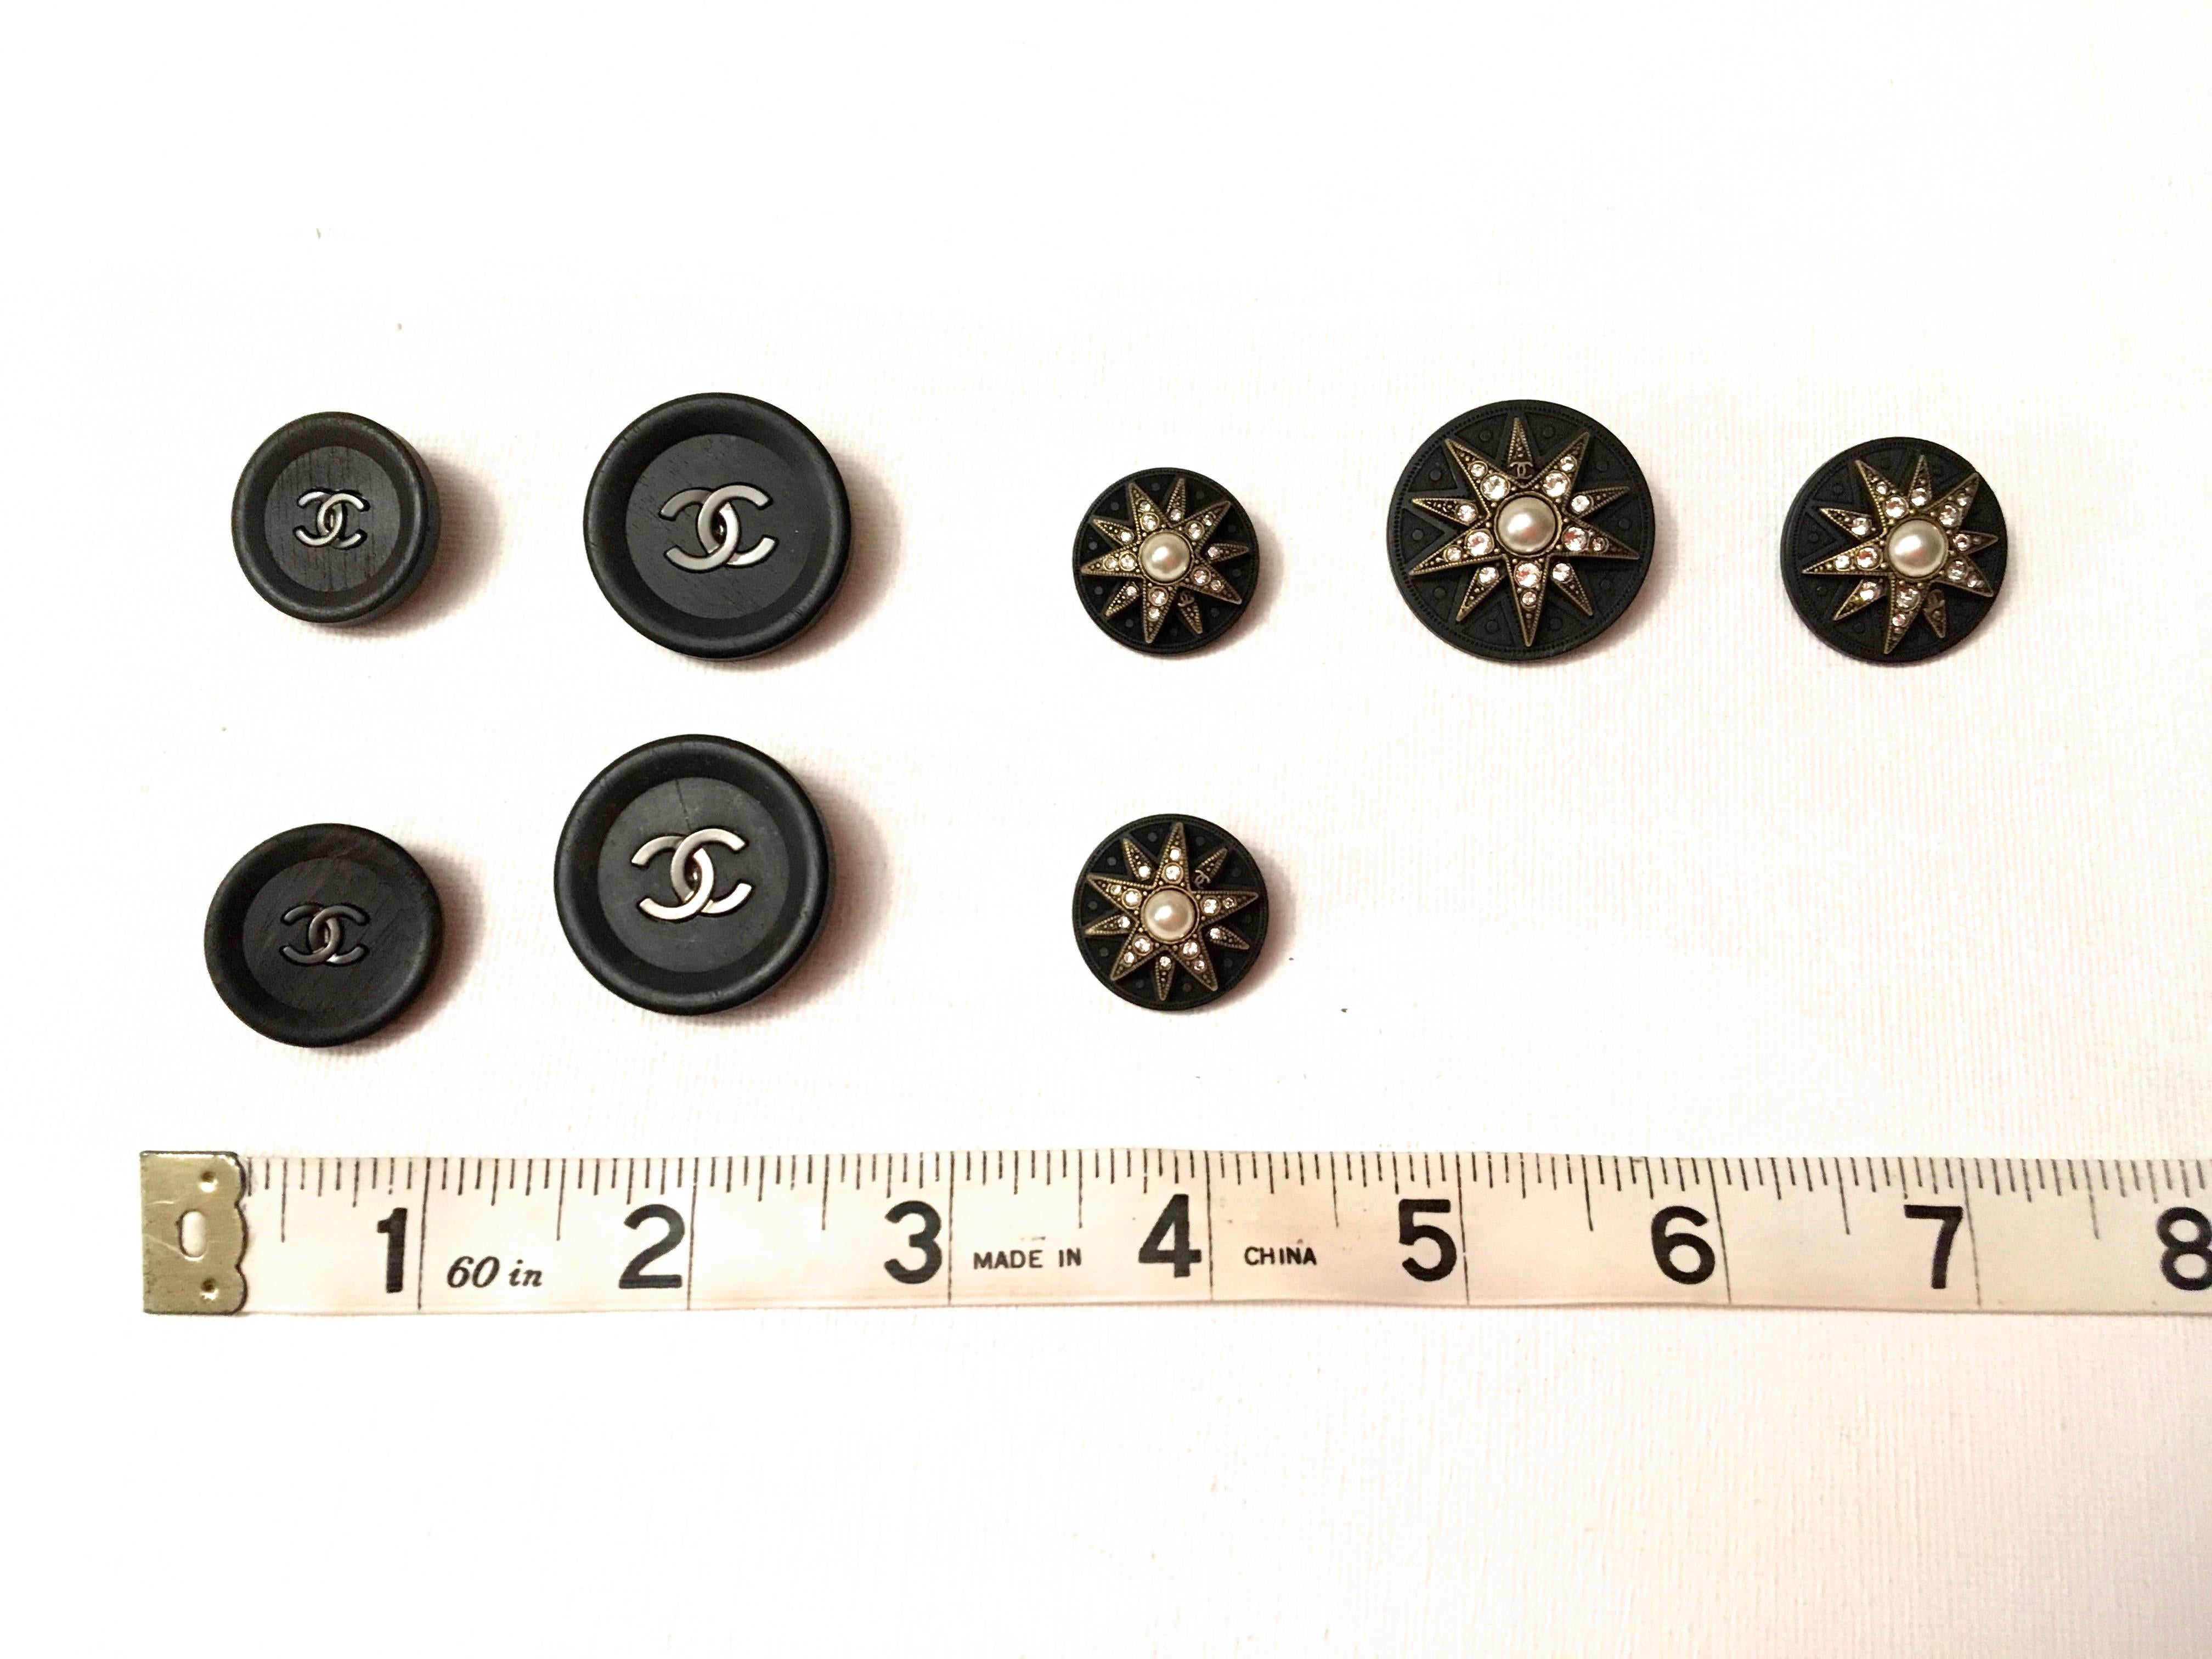  Chanel Button Collection Rare In Excellent Condition For Sale In Boca Raton, FL